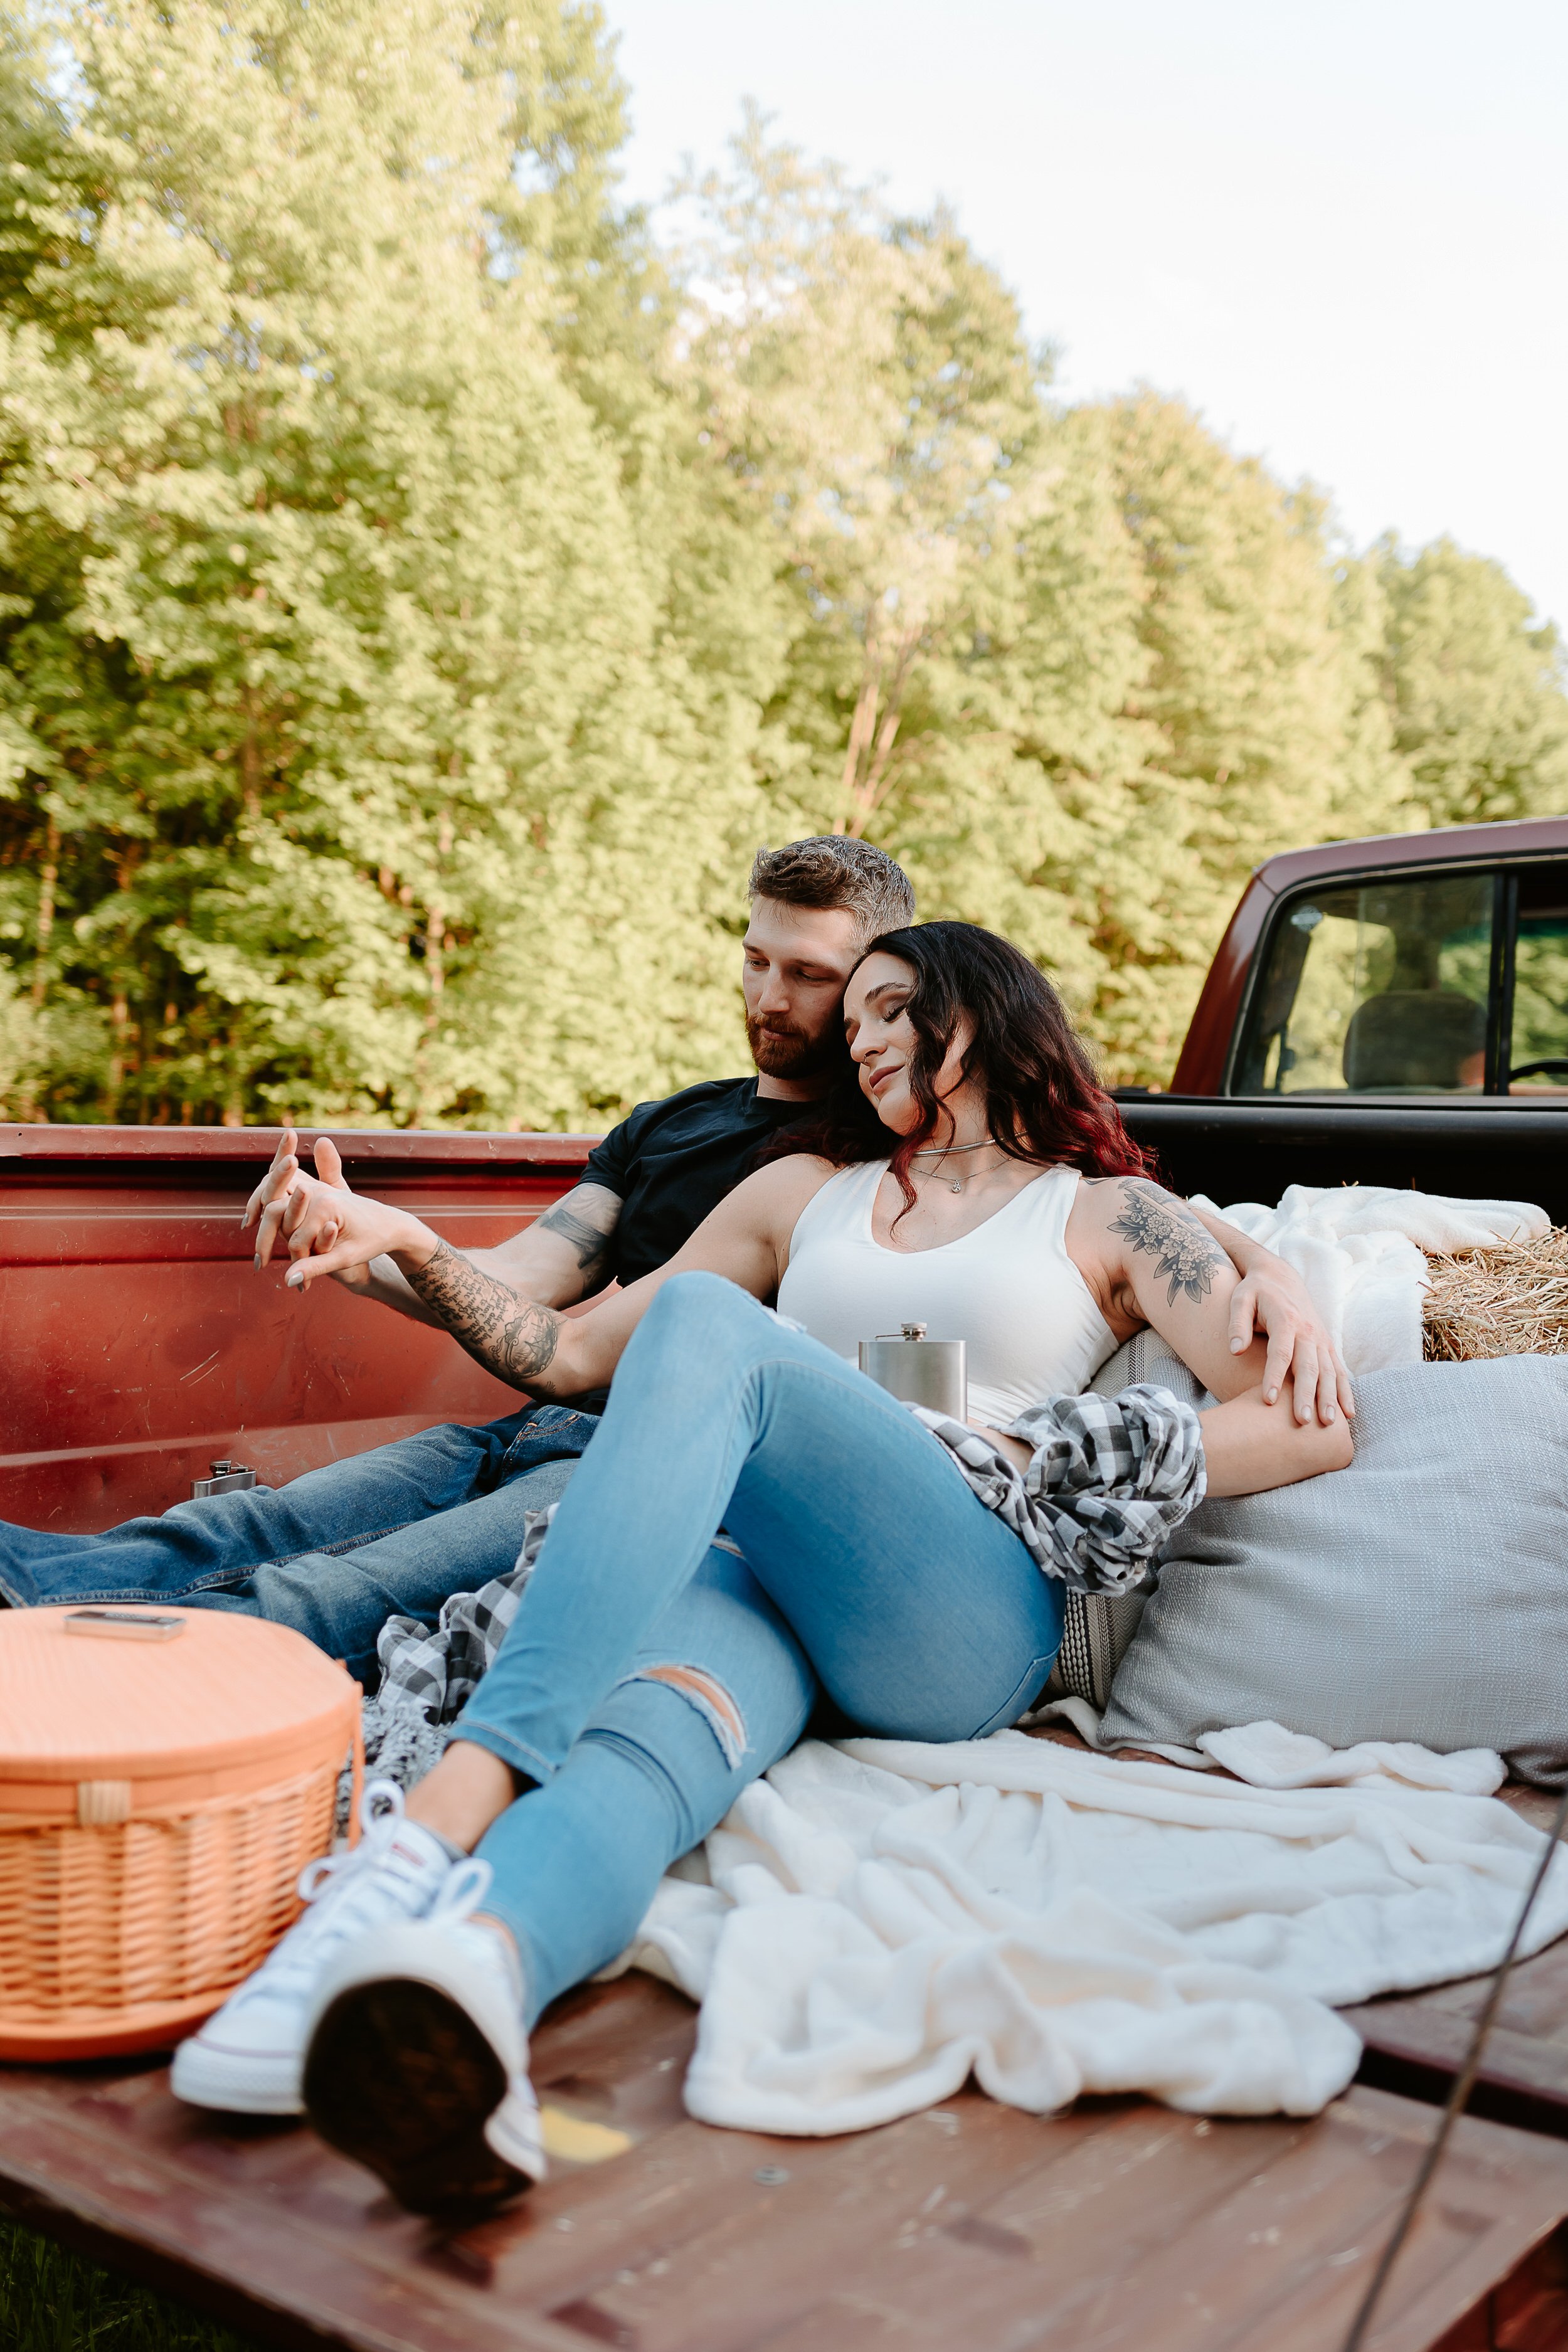 Couple cuddling in bed of red truck.